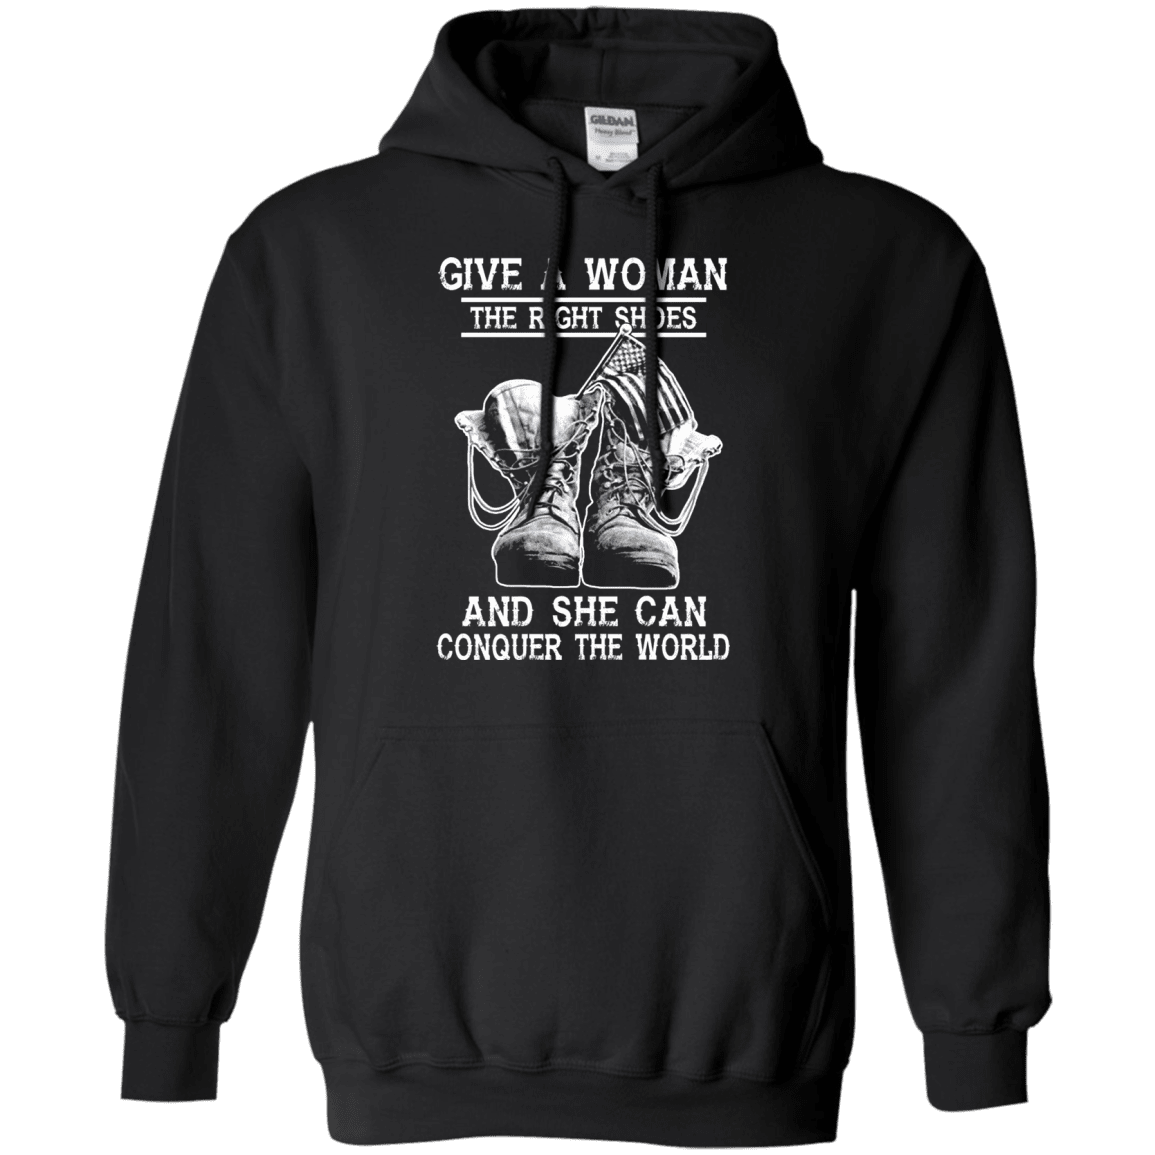 Military T-Shirt "Give a woman the right shoes, and she can conquer the world"-TShirt-General-Veterans Nation